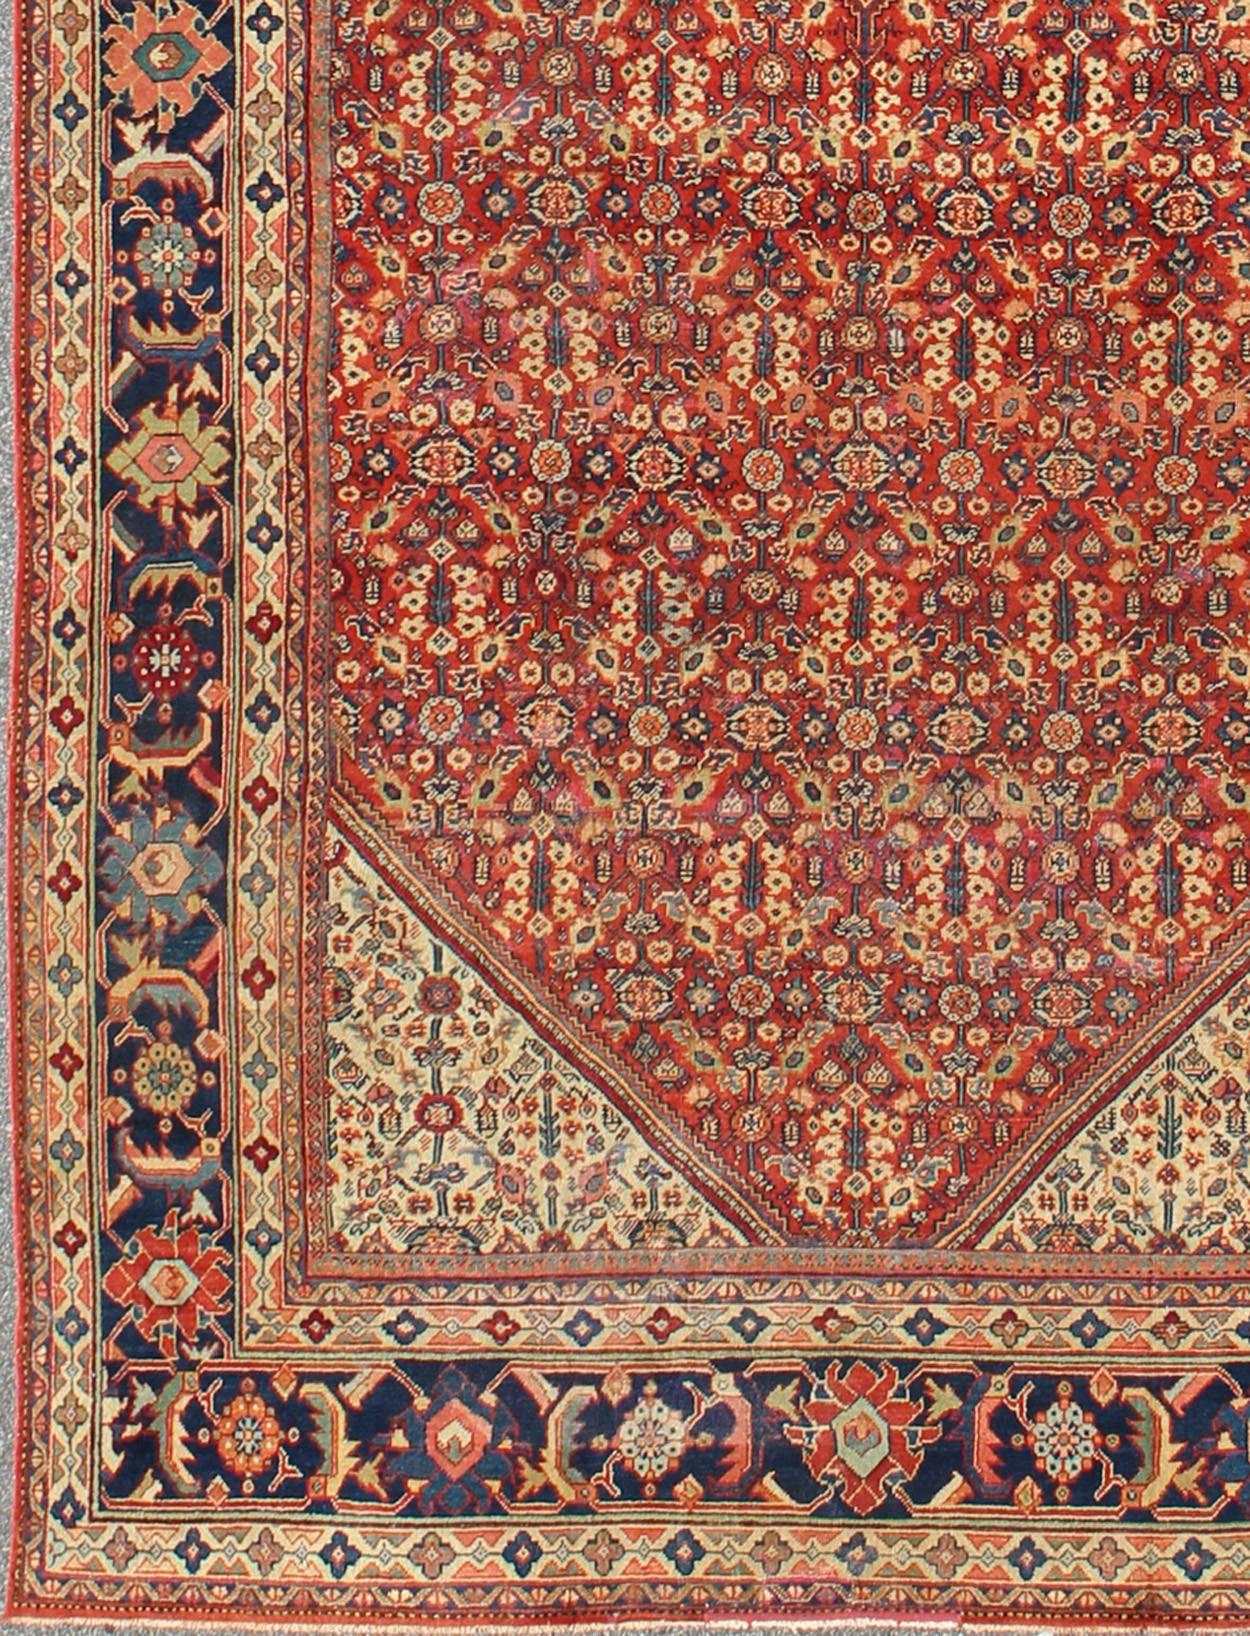 Antique Persian Sultanabad rug with Sub-geometric motifs with a Diamond Central Medallion.  rug E-0909, country of origin / type: Iran / Sultanabad, circa 1910.

This beautiful antique Persian Sultanabad carpet, handwoven in the early 20th century